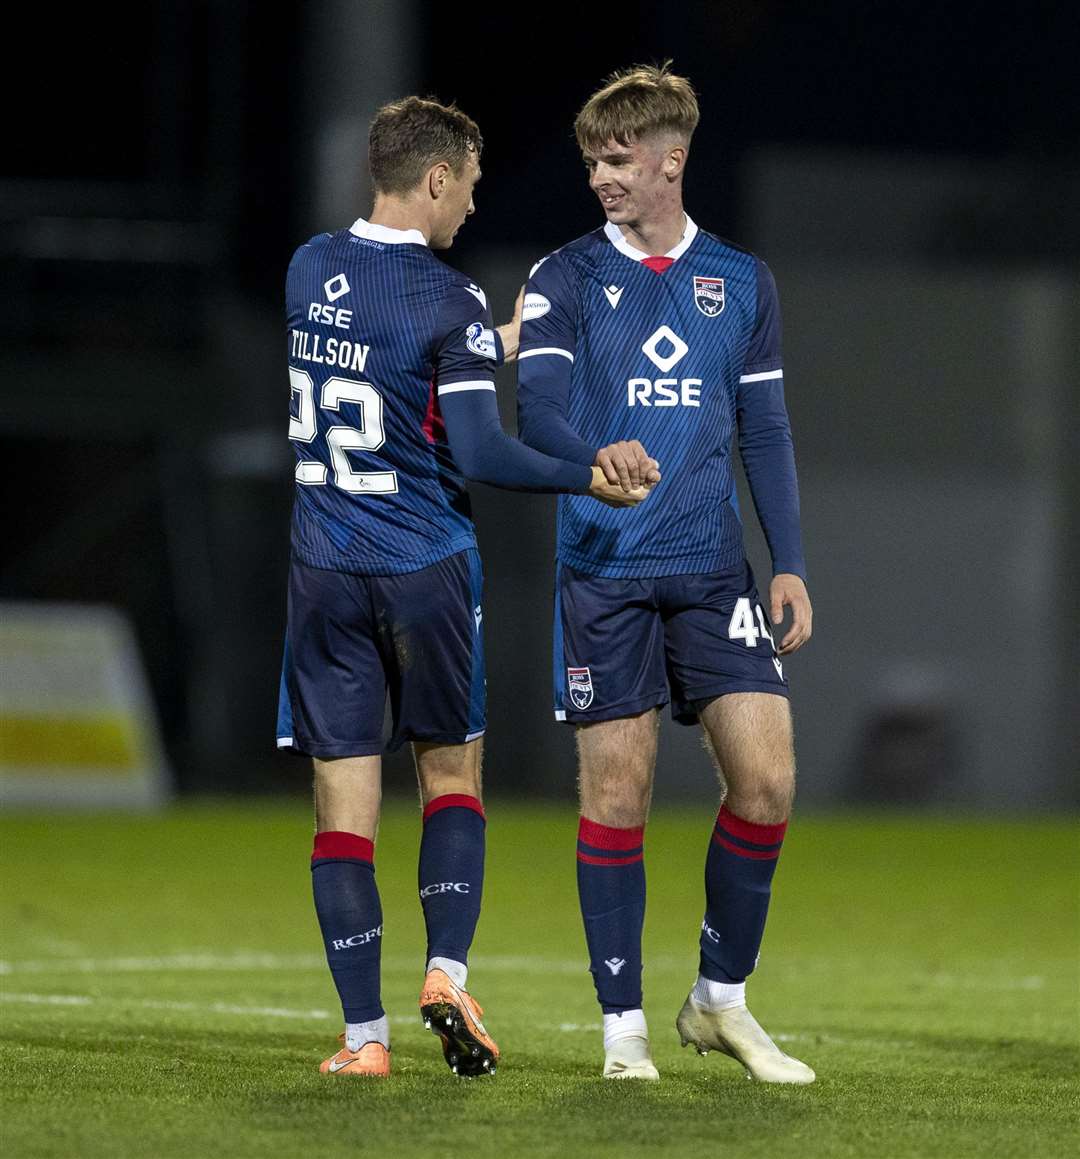 Picture - Ken Macpherson, Inverness. Betfred Cup Group stage. Ross County(3) v Stirling Albion(0). 14.11.20. Ross County's Jordan Tillson with Matthew Wright at the end.